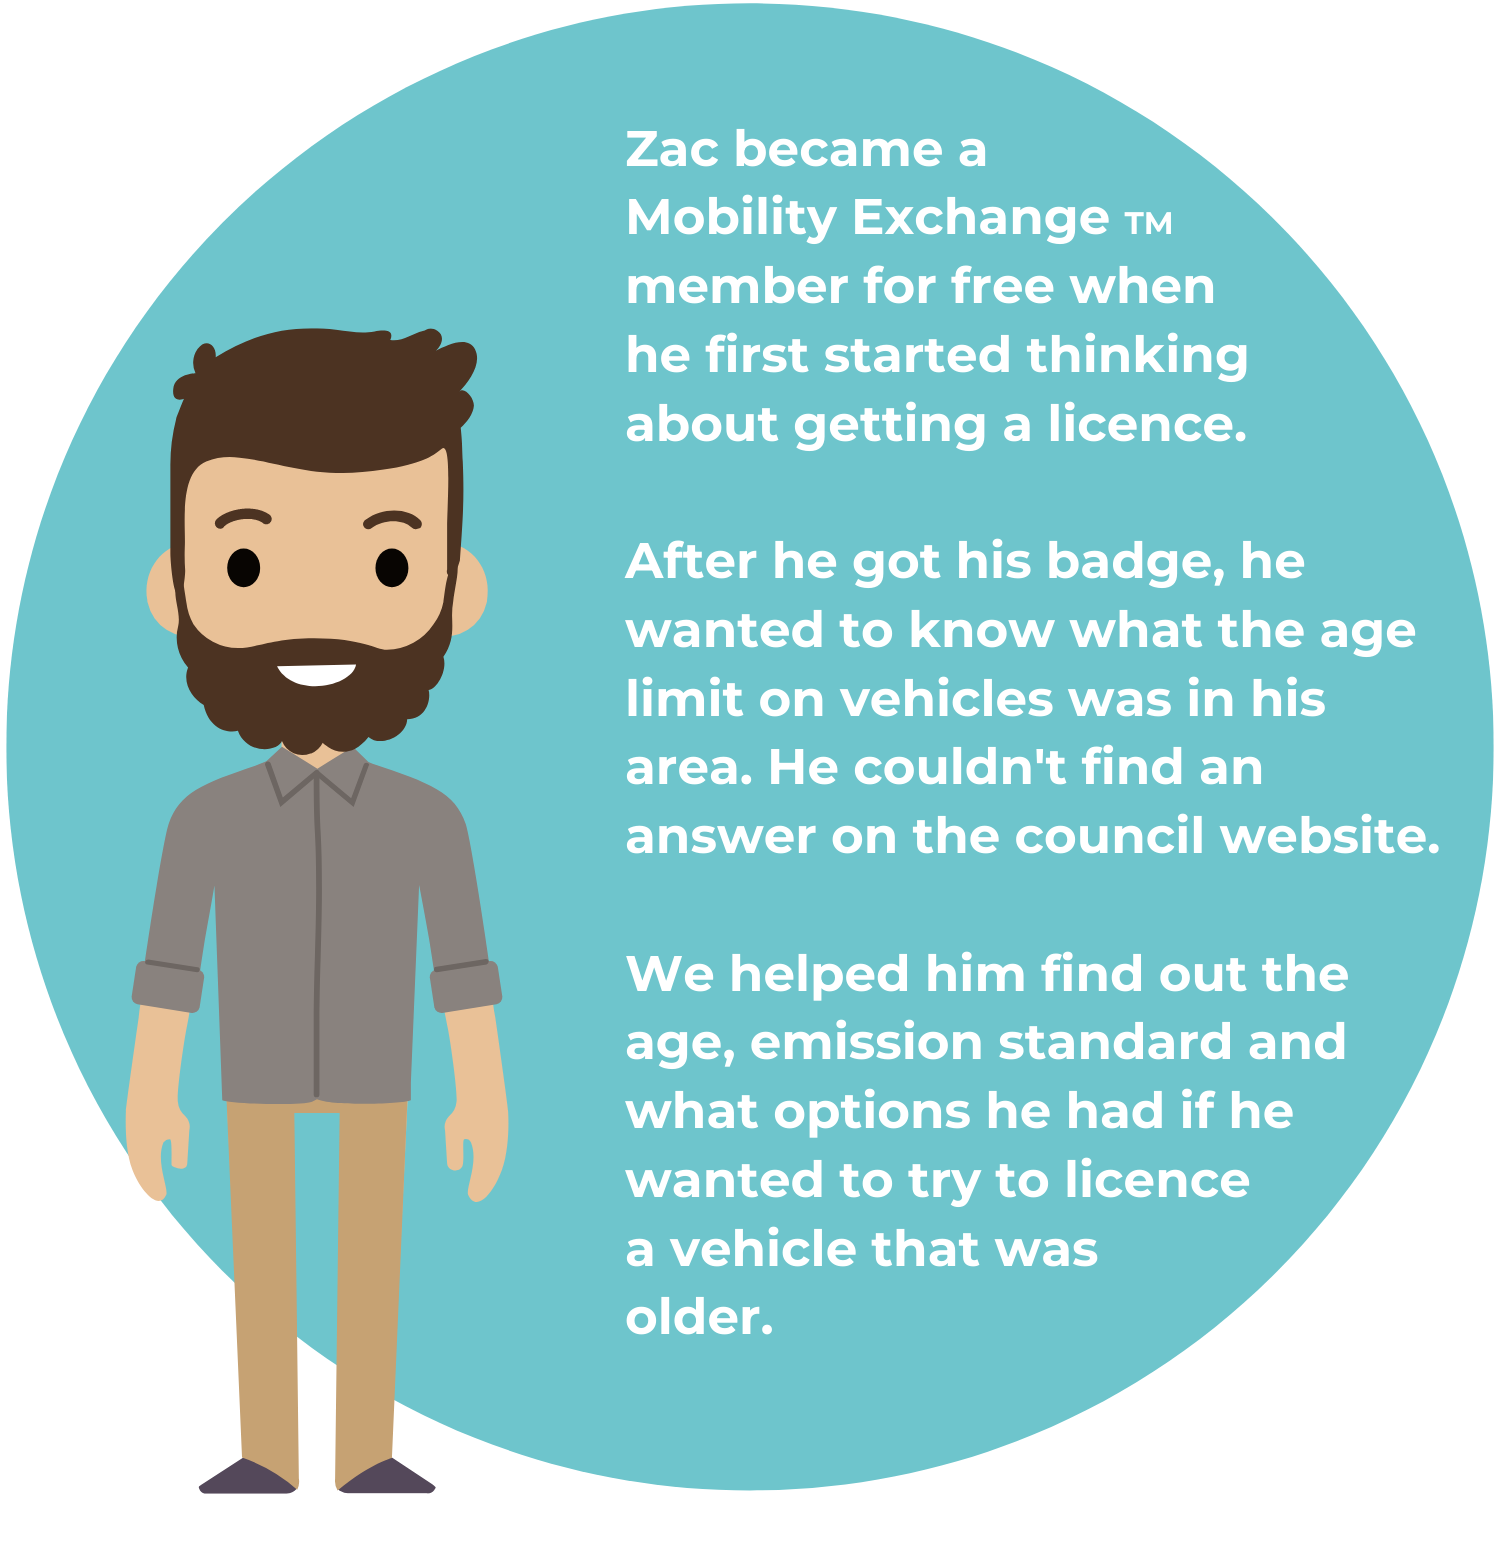 Zac became a Mobility Exchange TM member for free when he first started thinking about getting a licence. After he got his badge, he realised he wanted to know what the age limit on vehicles was in his area and he couldn't find answer on the council website. We helped him find out the age, emission standard and what options he had if he wanted to try to licence a vehicle that was older.